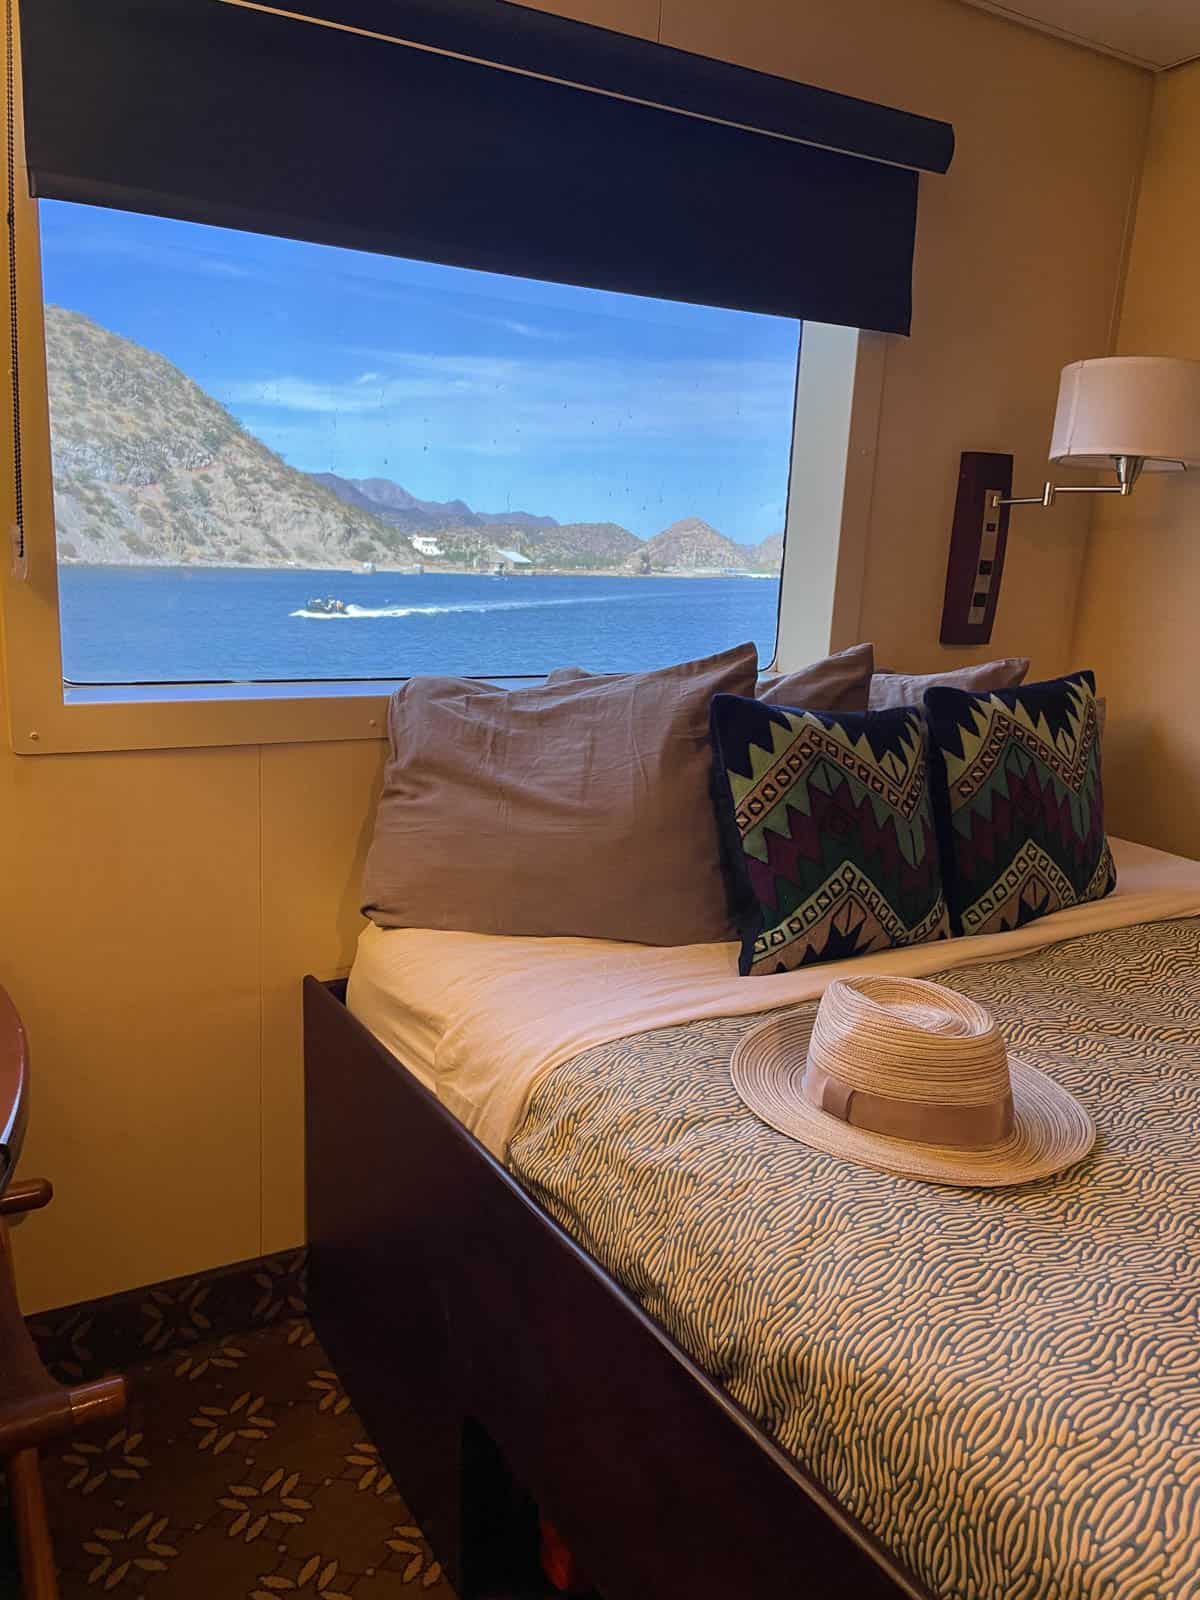 Room on a boat with hat on bed and window looking out at Baja Mexico.